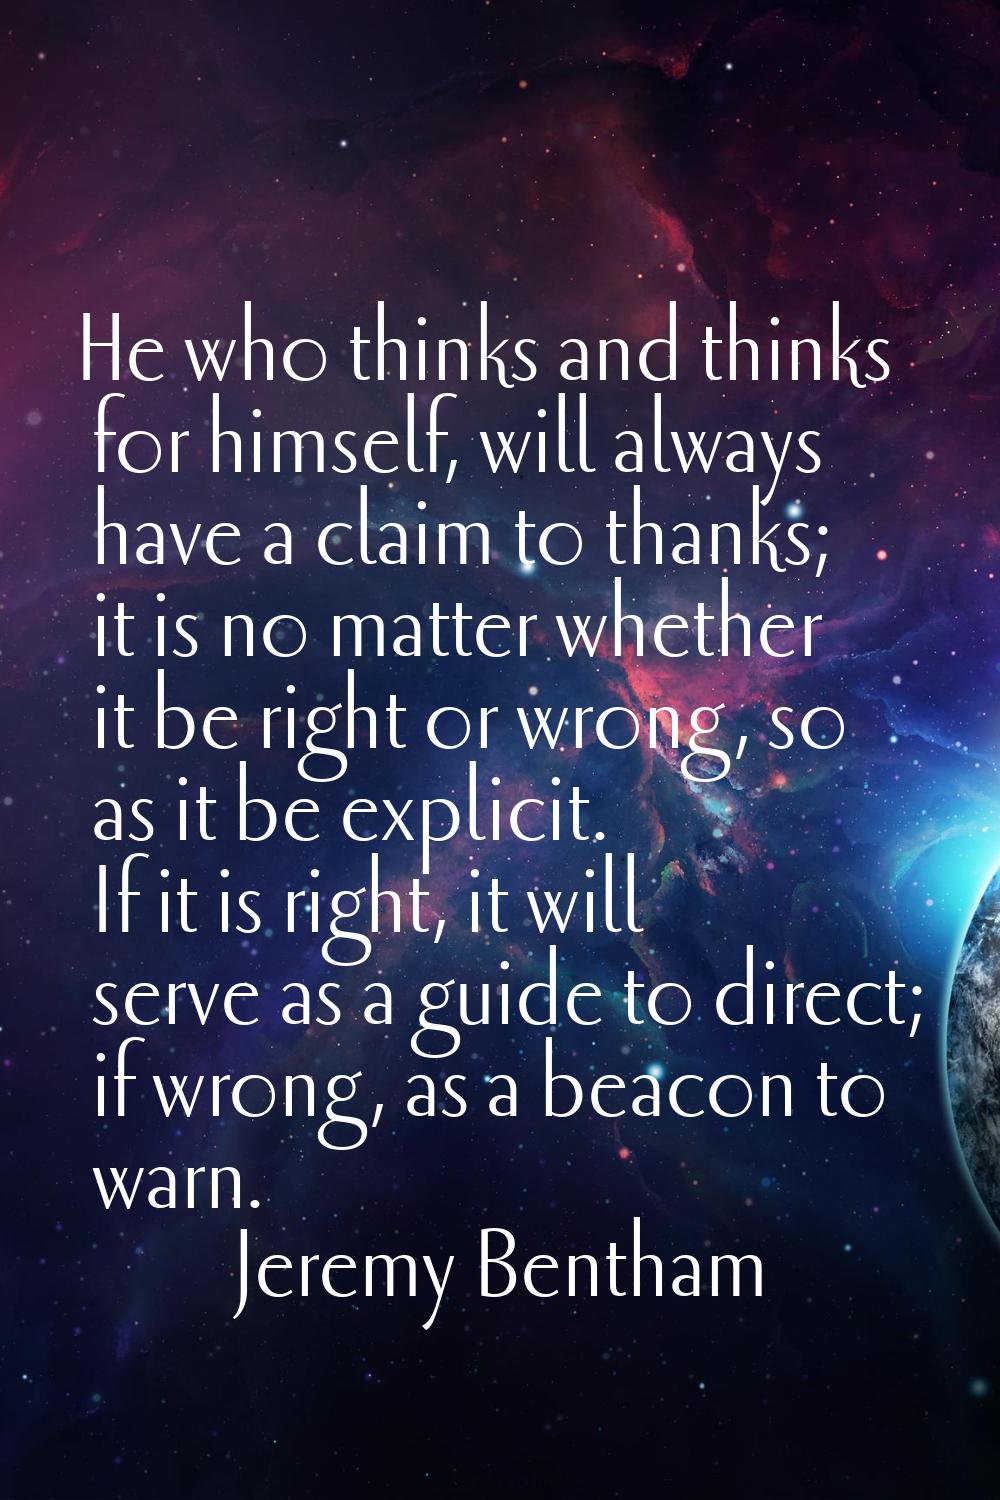 He who thinks and thinks for himself, will always have a claim to thanks; it is no matter whether i